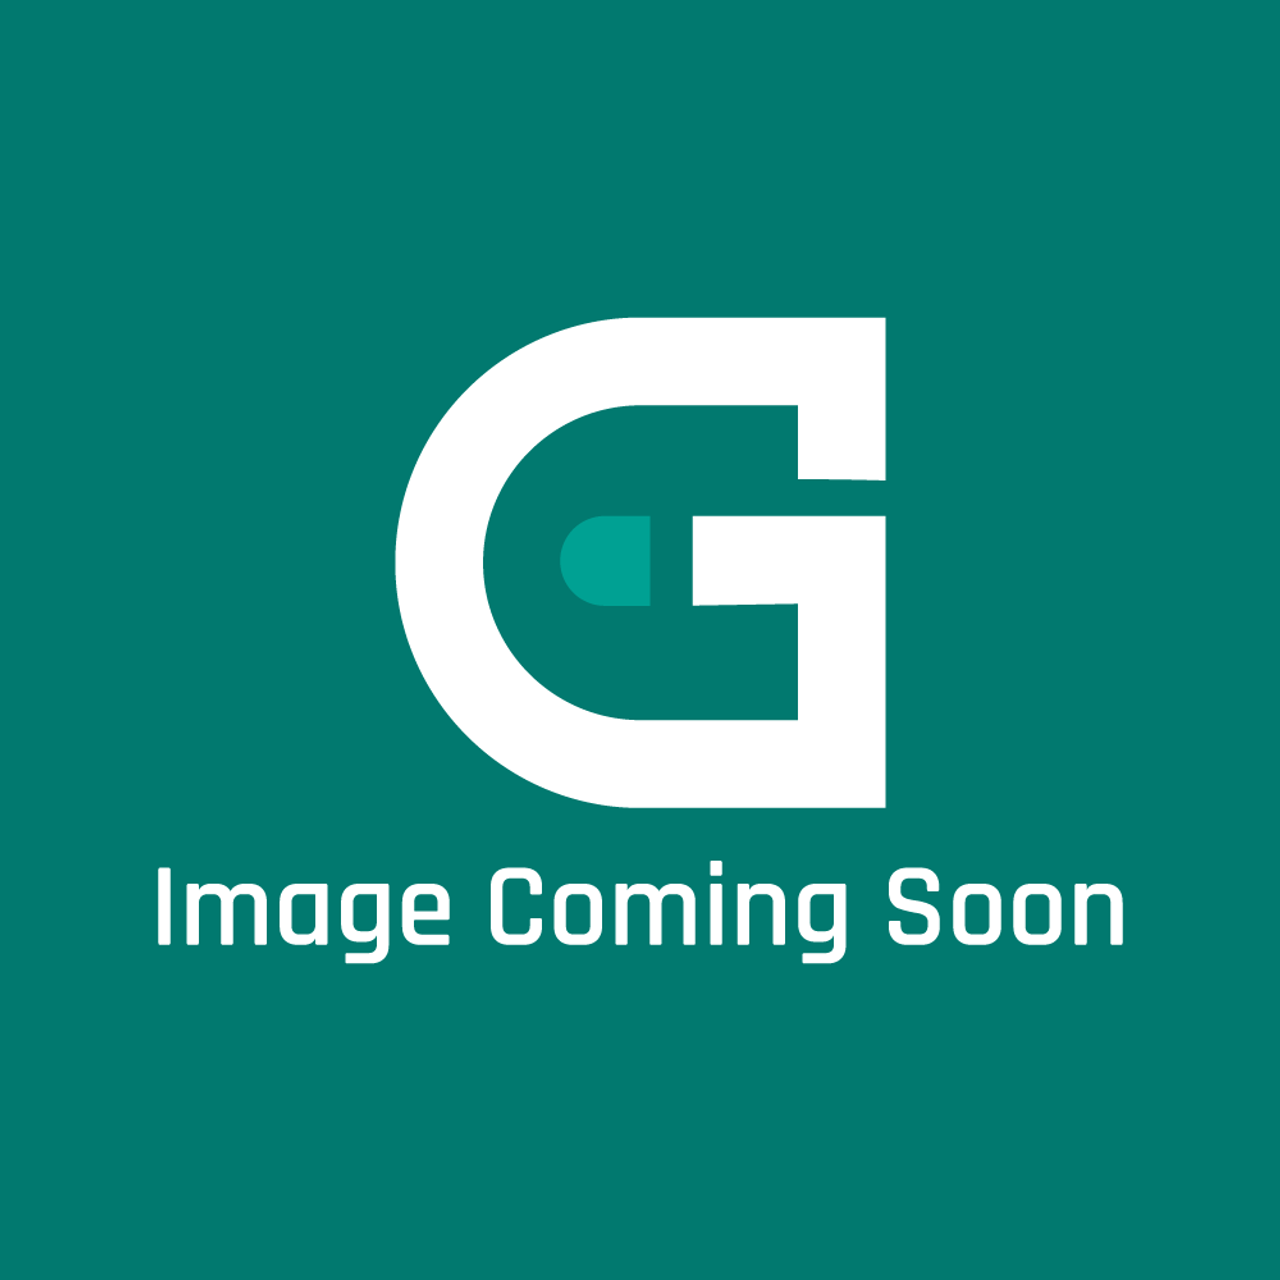 AGA Marvel C1315 - Fireplace Sealing Plate Cb Gs1 - Image Coming Soon!